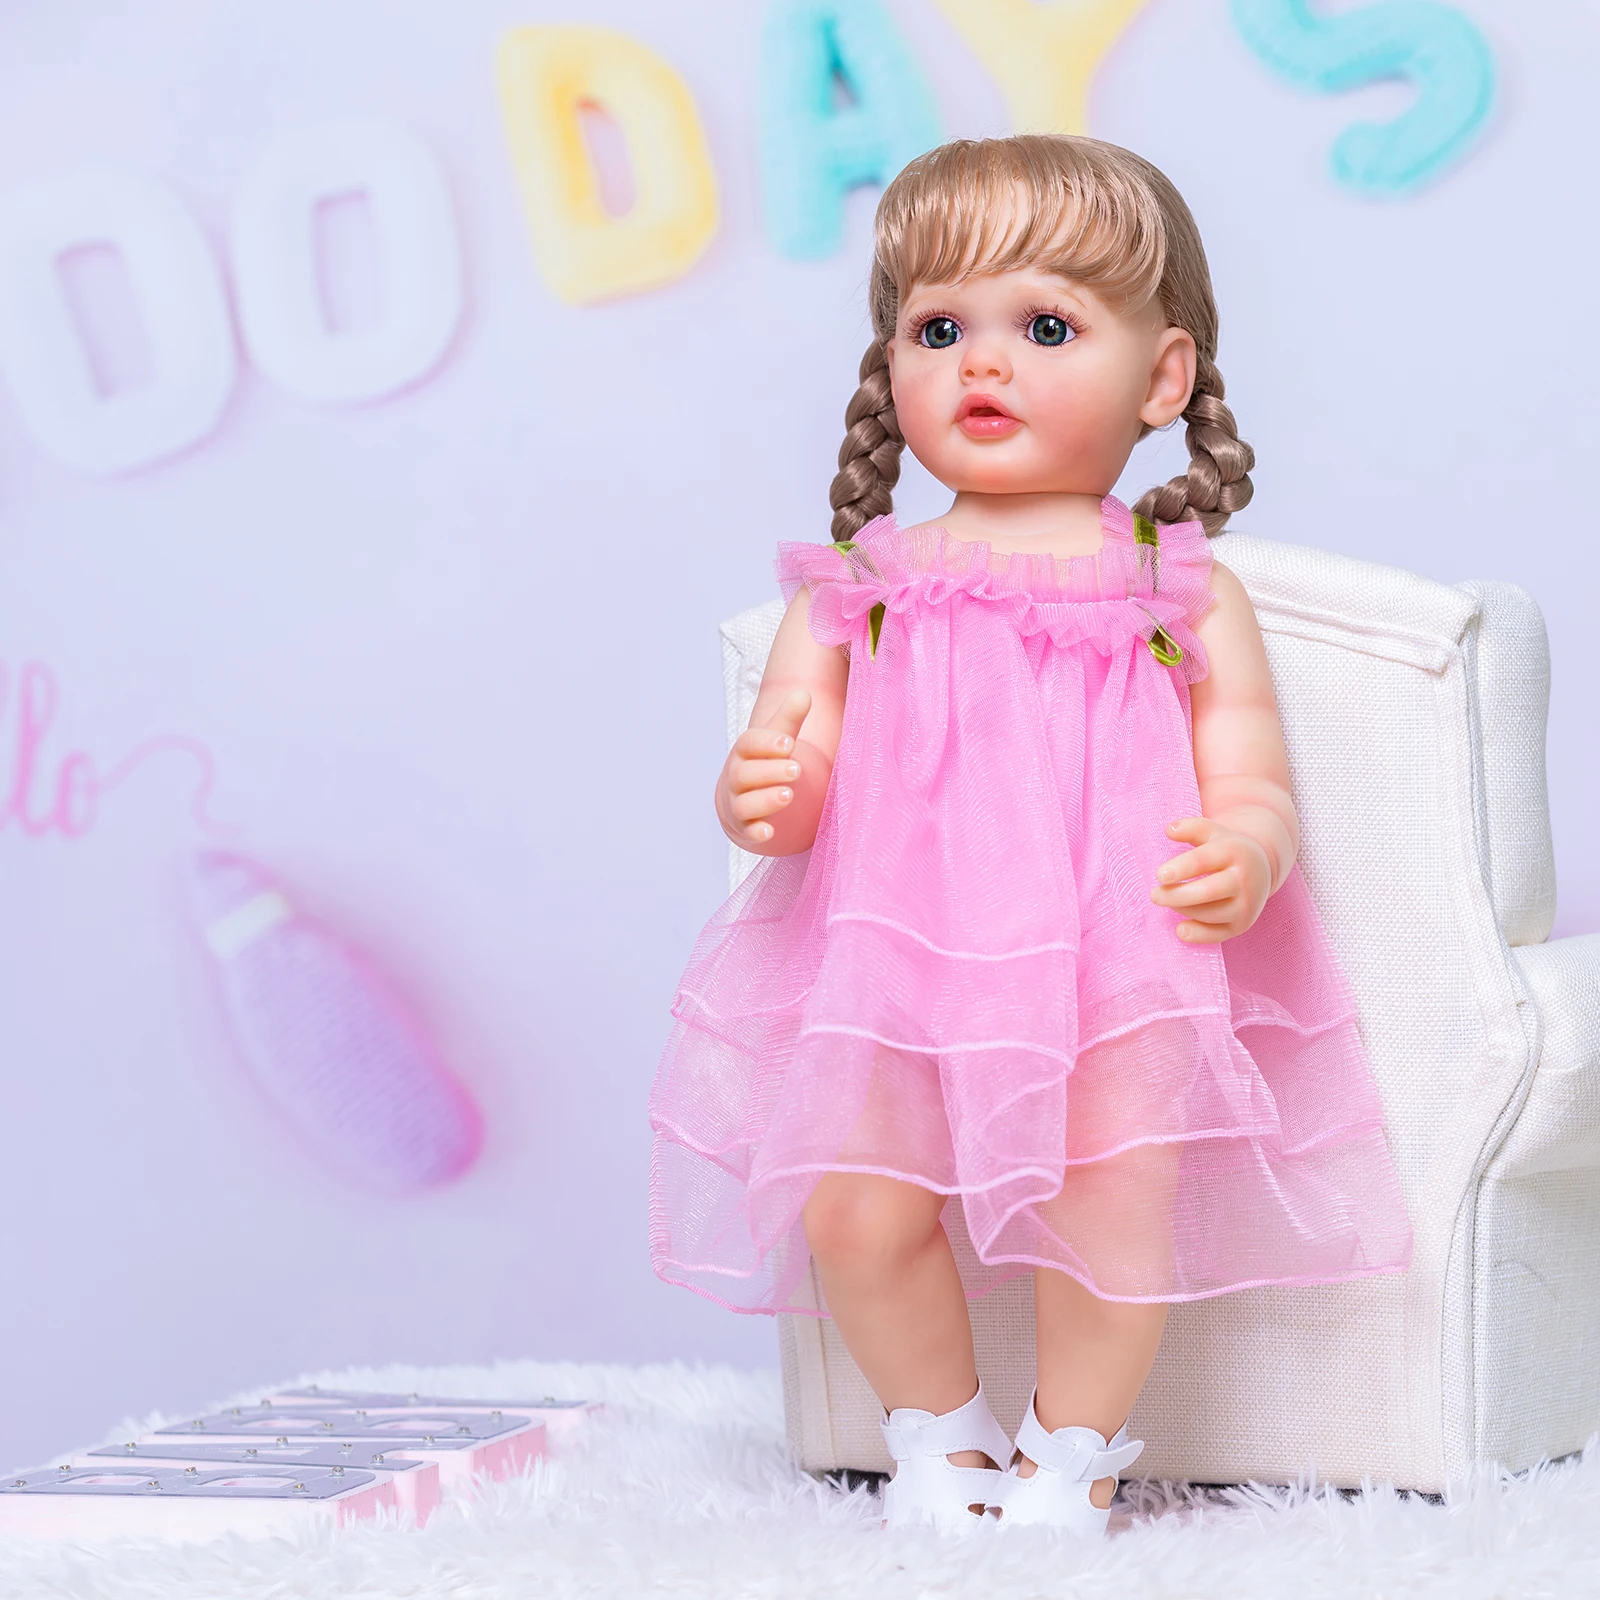 

XMAS GIFT 55CM Already Painted Finished Bebe Reborn Toddler Girl Doll Full Body Soft Silicone Vinyl Betty 3D Skin Soft Kids Toys